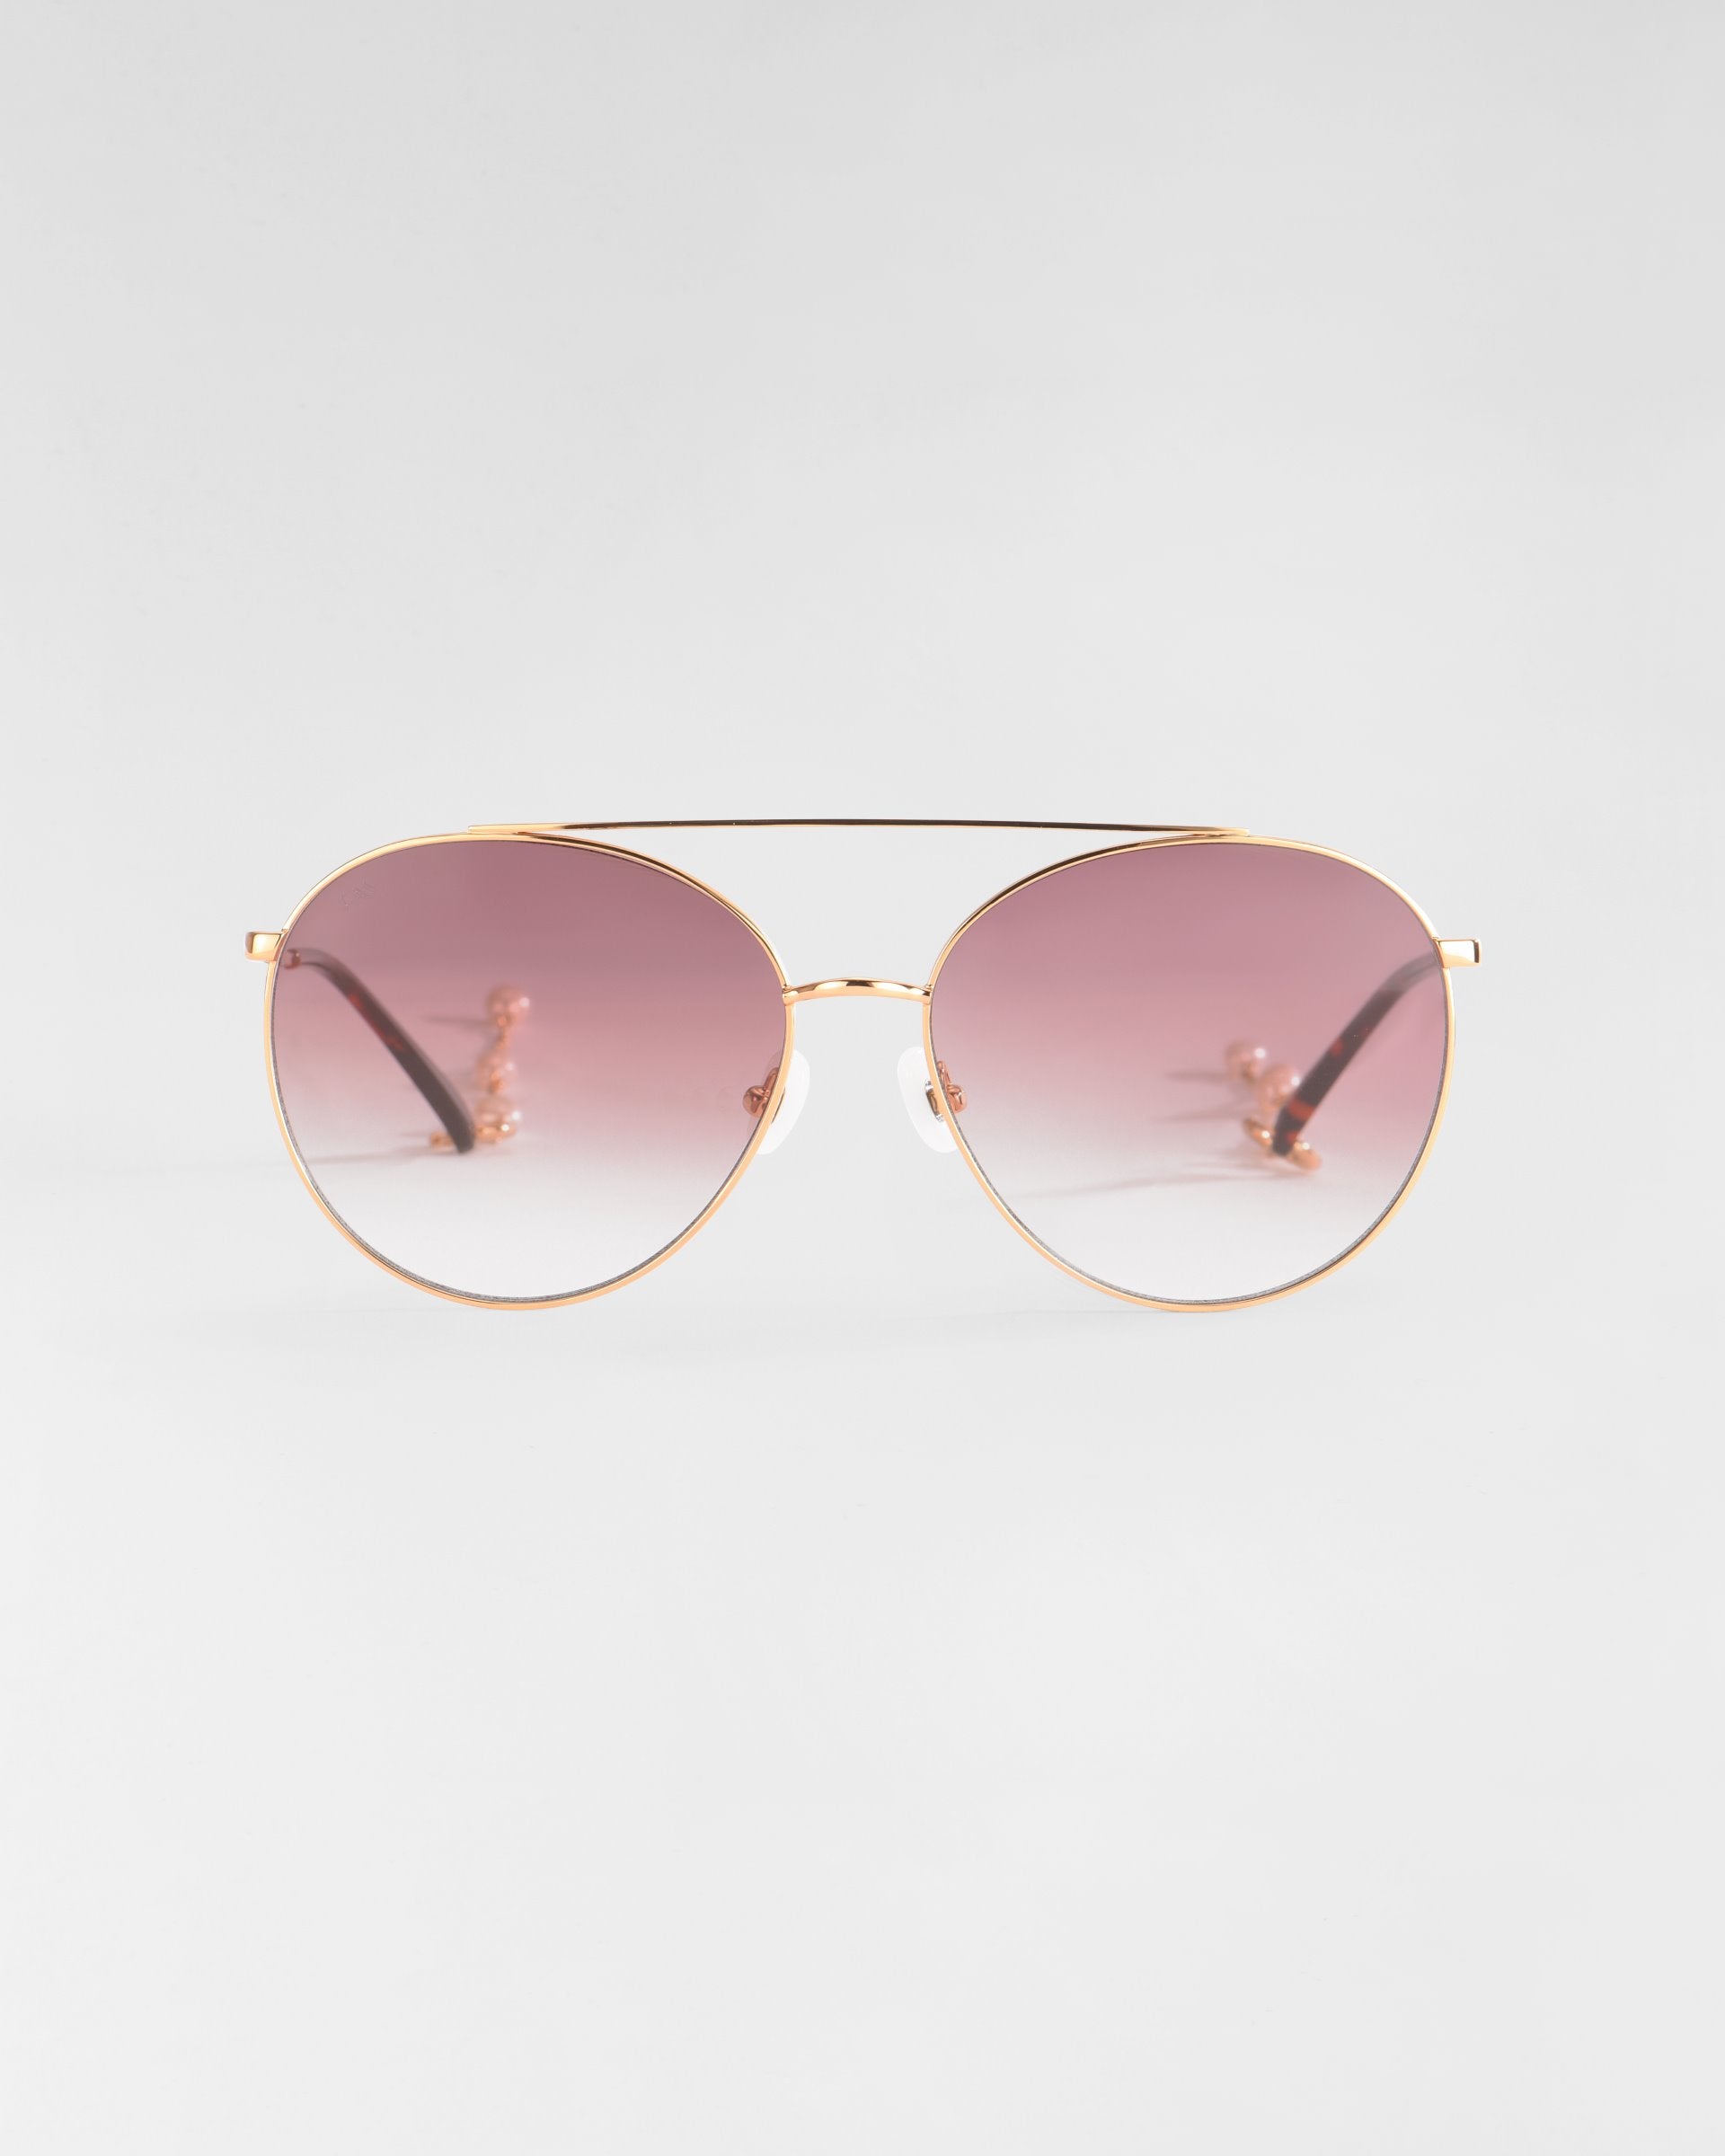 A pair of stylish aviator sunglasses named Yoyo by For Art&#39;s Sake® with 18k gold-plated metal frames and gradient pink-tinted lenses is centered against a plain, light gray background. The Yoyo sunglasses feature thin arms and adjustable nose pads for comfort.